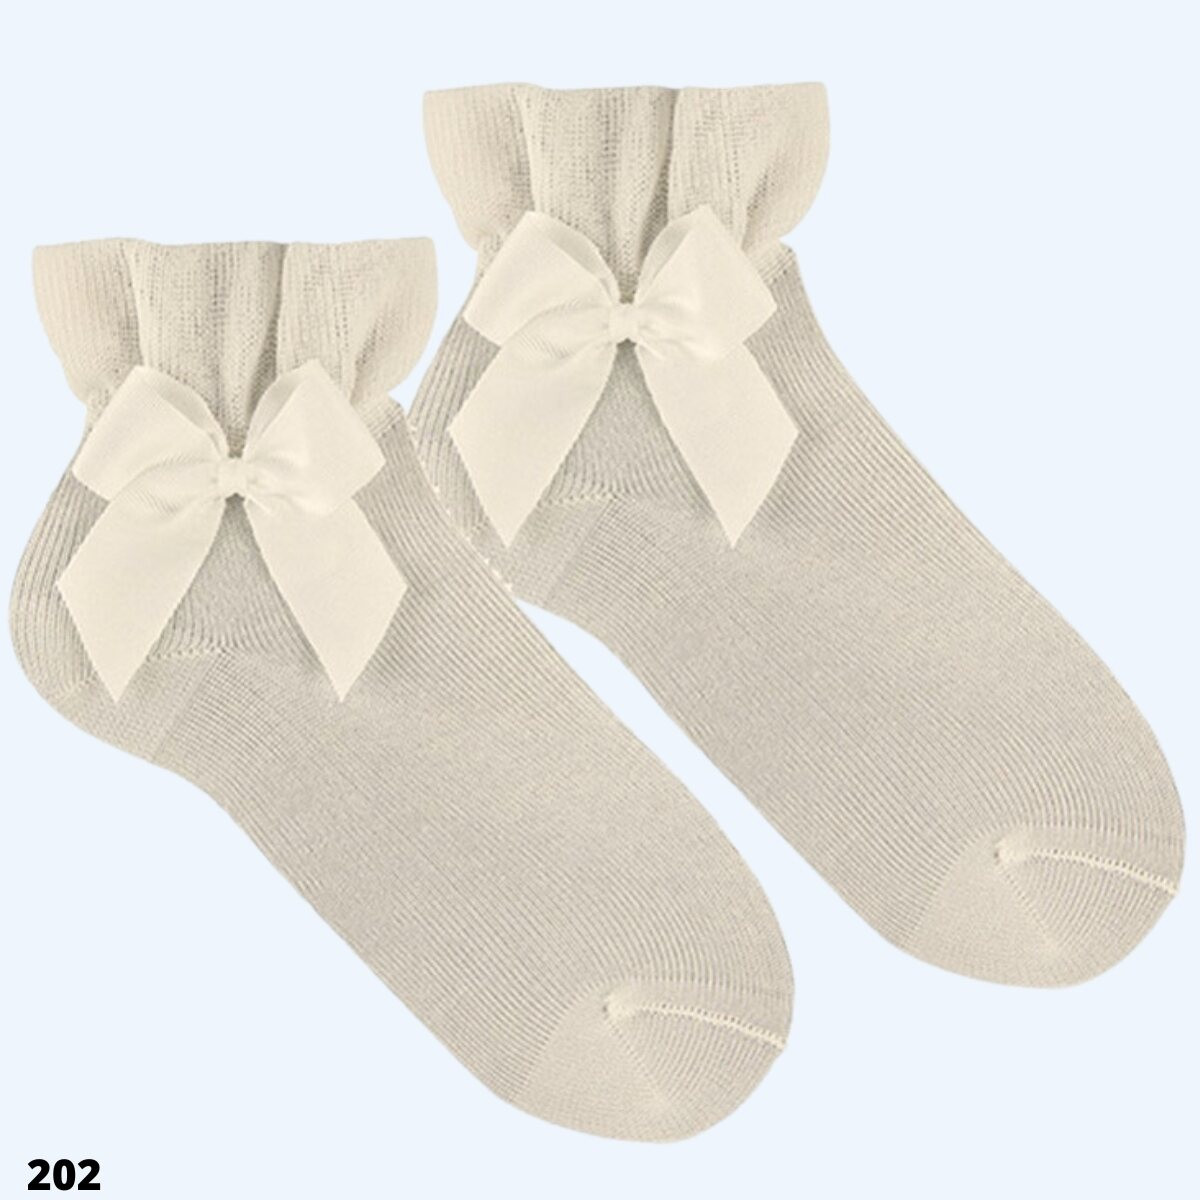 CEREMONY ANKLE SOCKSWITH GROSSGRAIN BOW CONDOR - 4